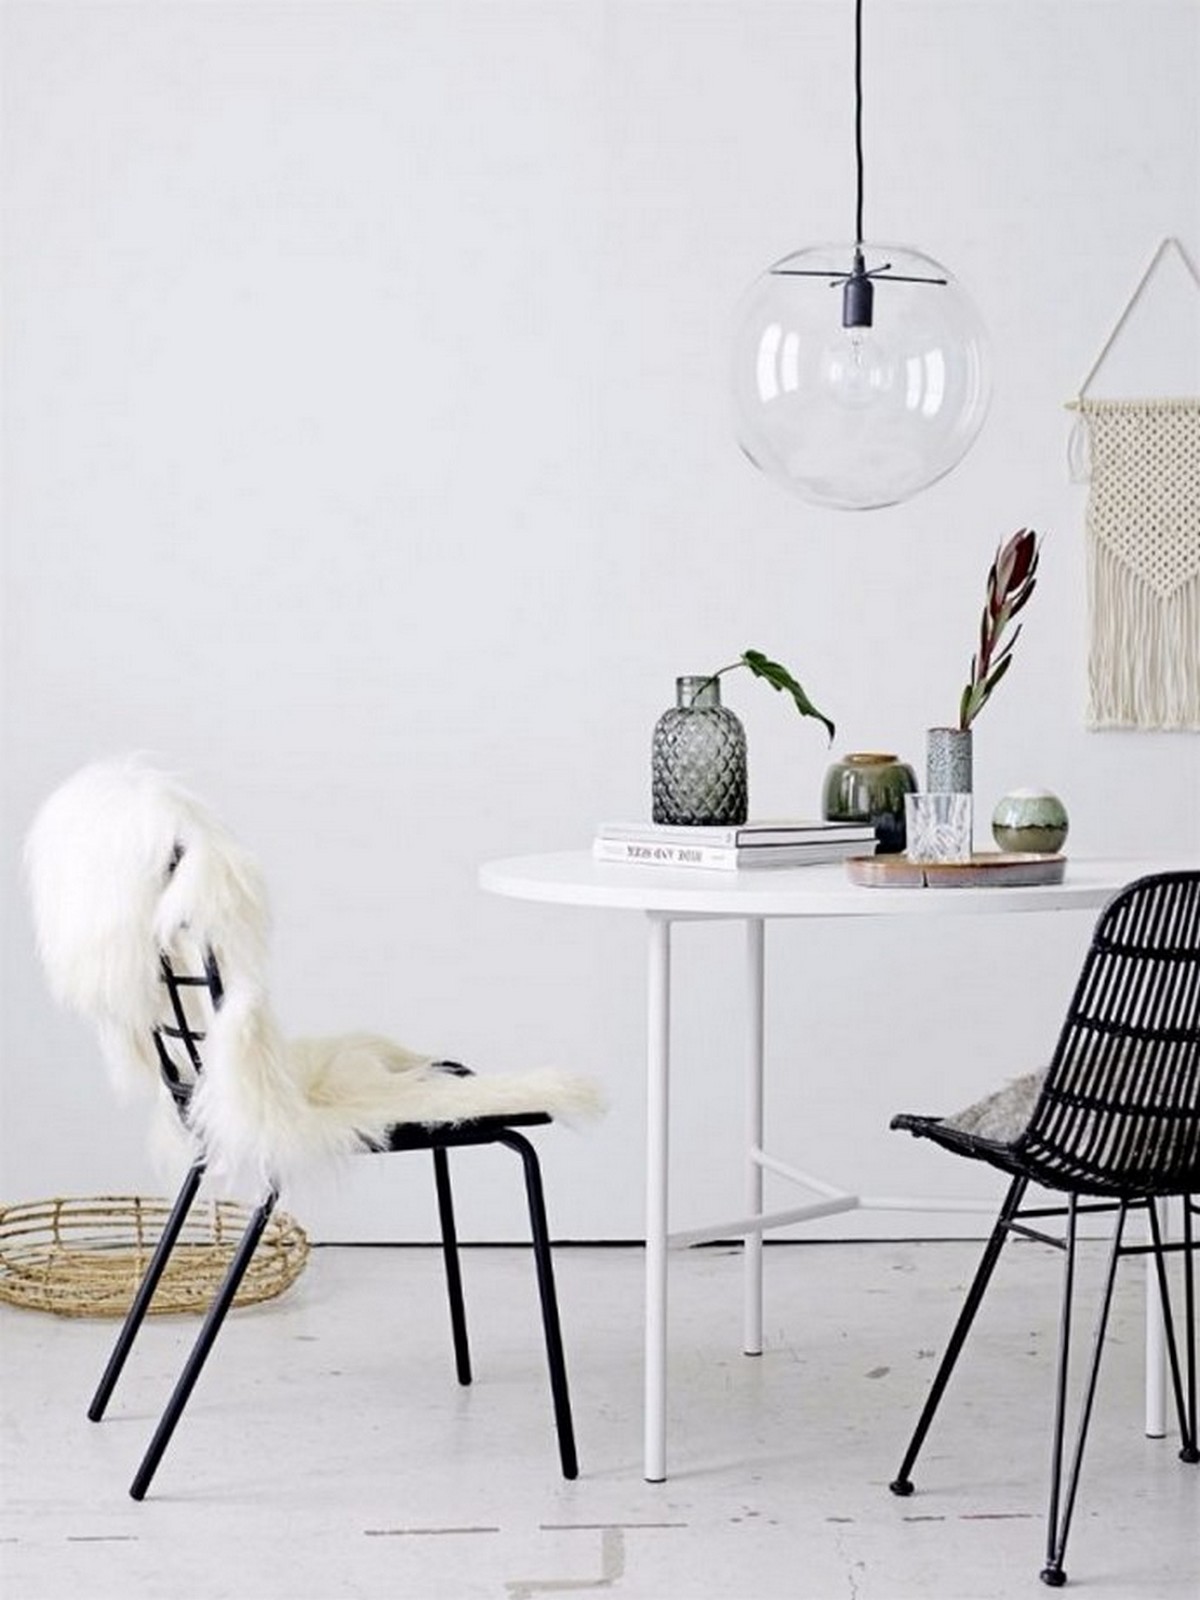 Get Inspired: Contemporary Ambiances Made For You